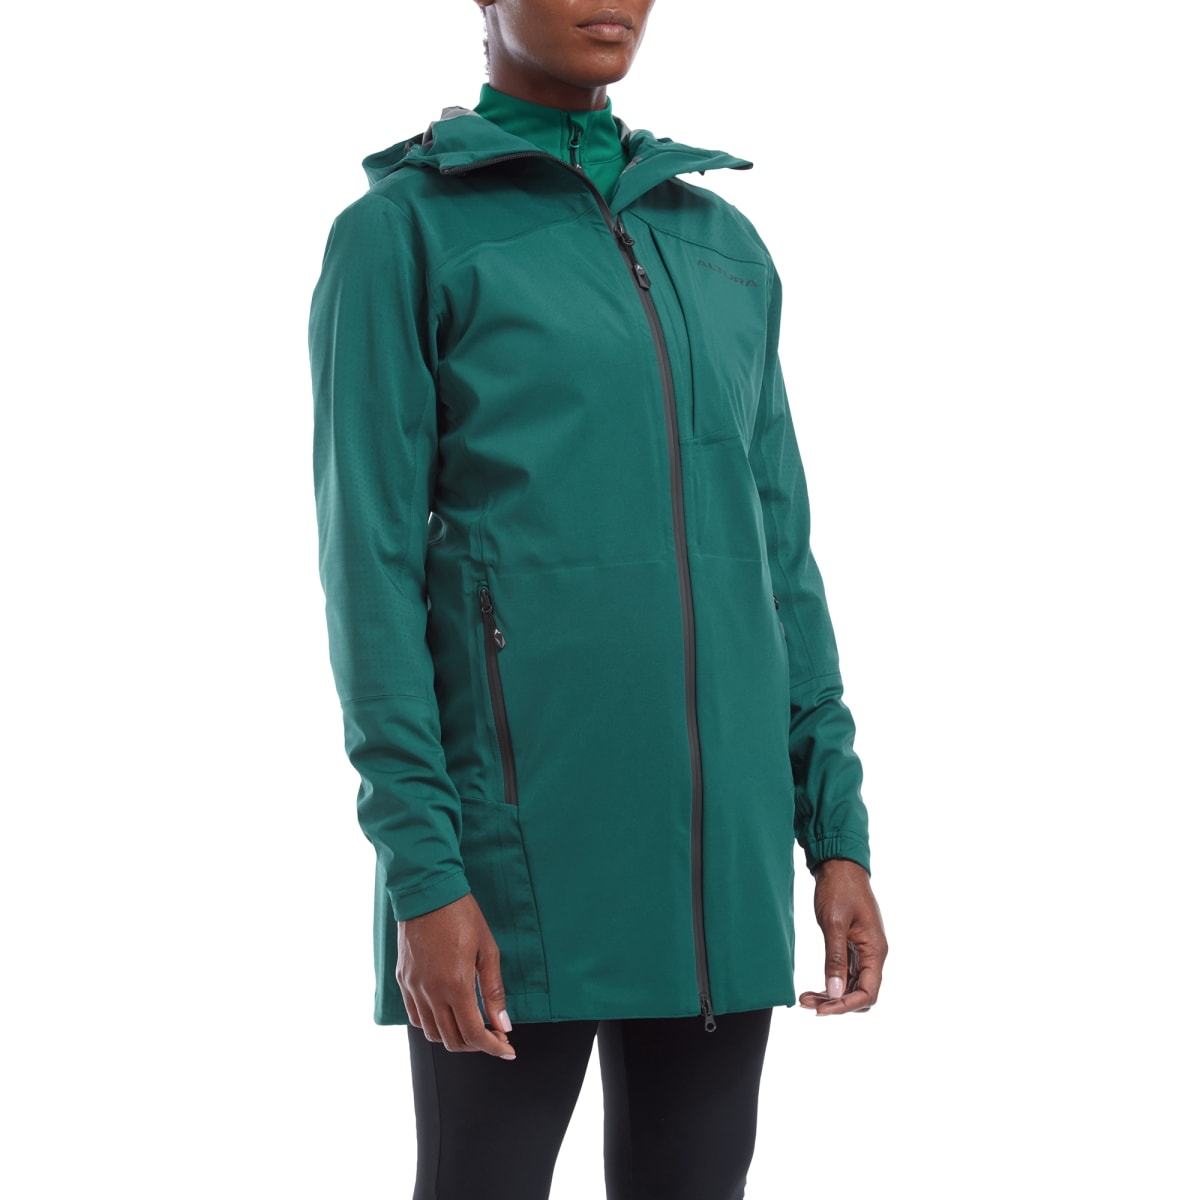 Altura  Nightvision Zephyr Womens Stretch Jacket 12 GREEN/TEAL